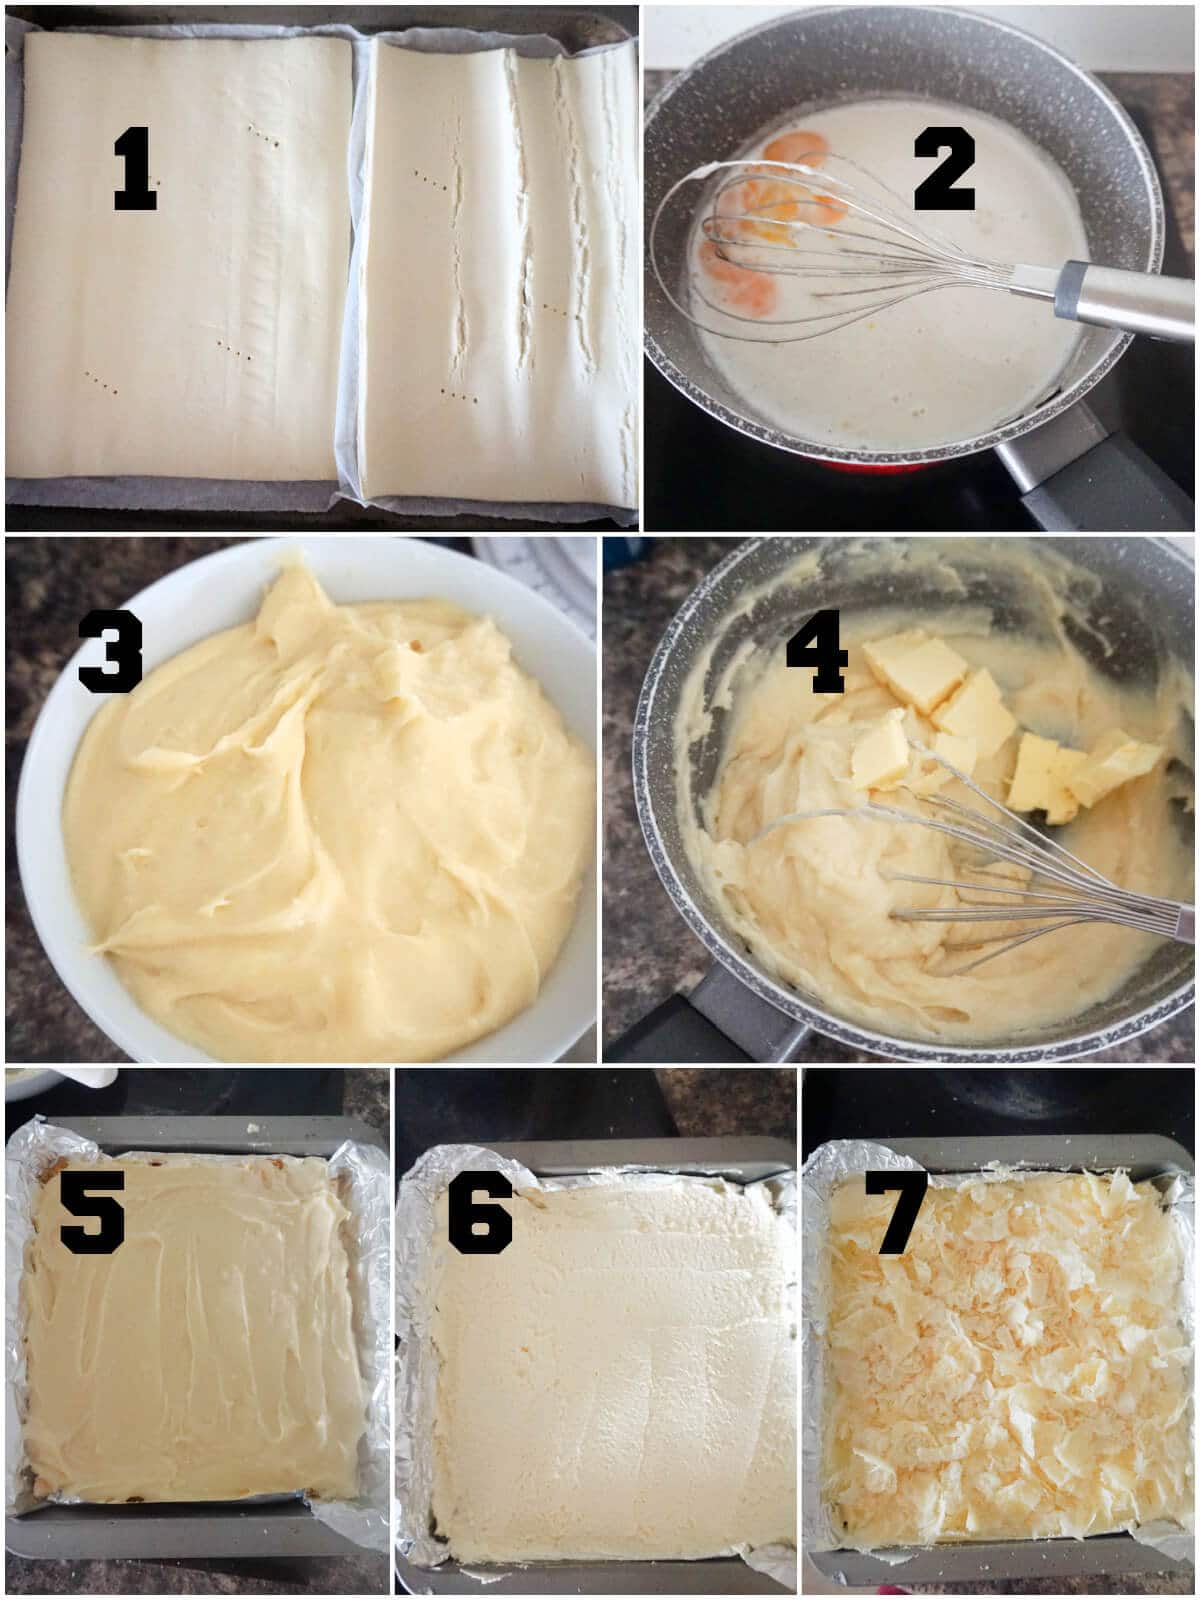 Collage of 7 pictures to show how to make cremeschnitte.